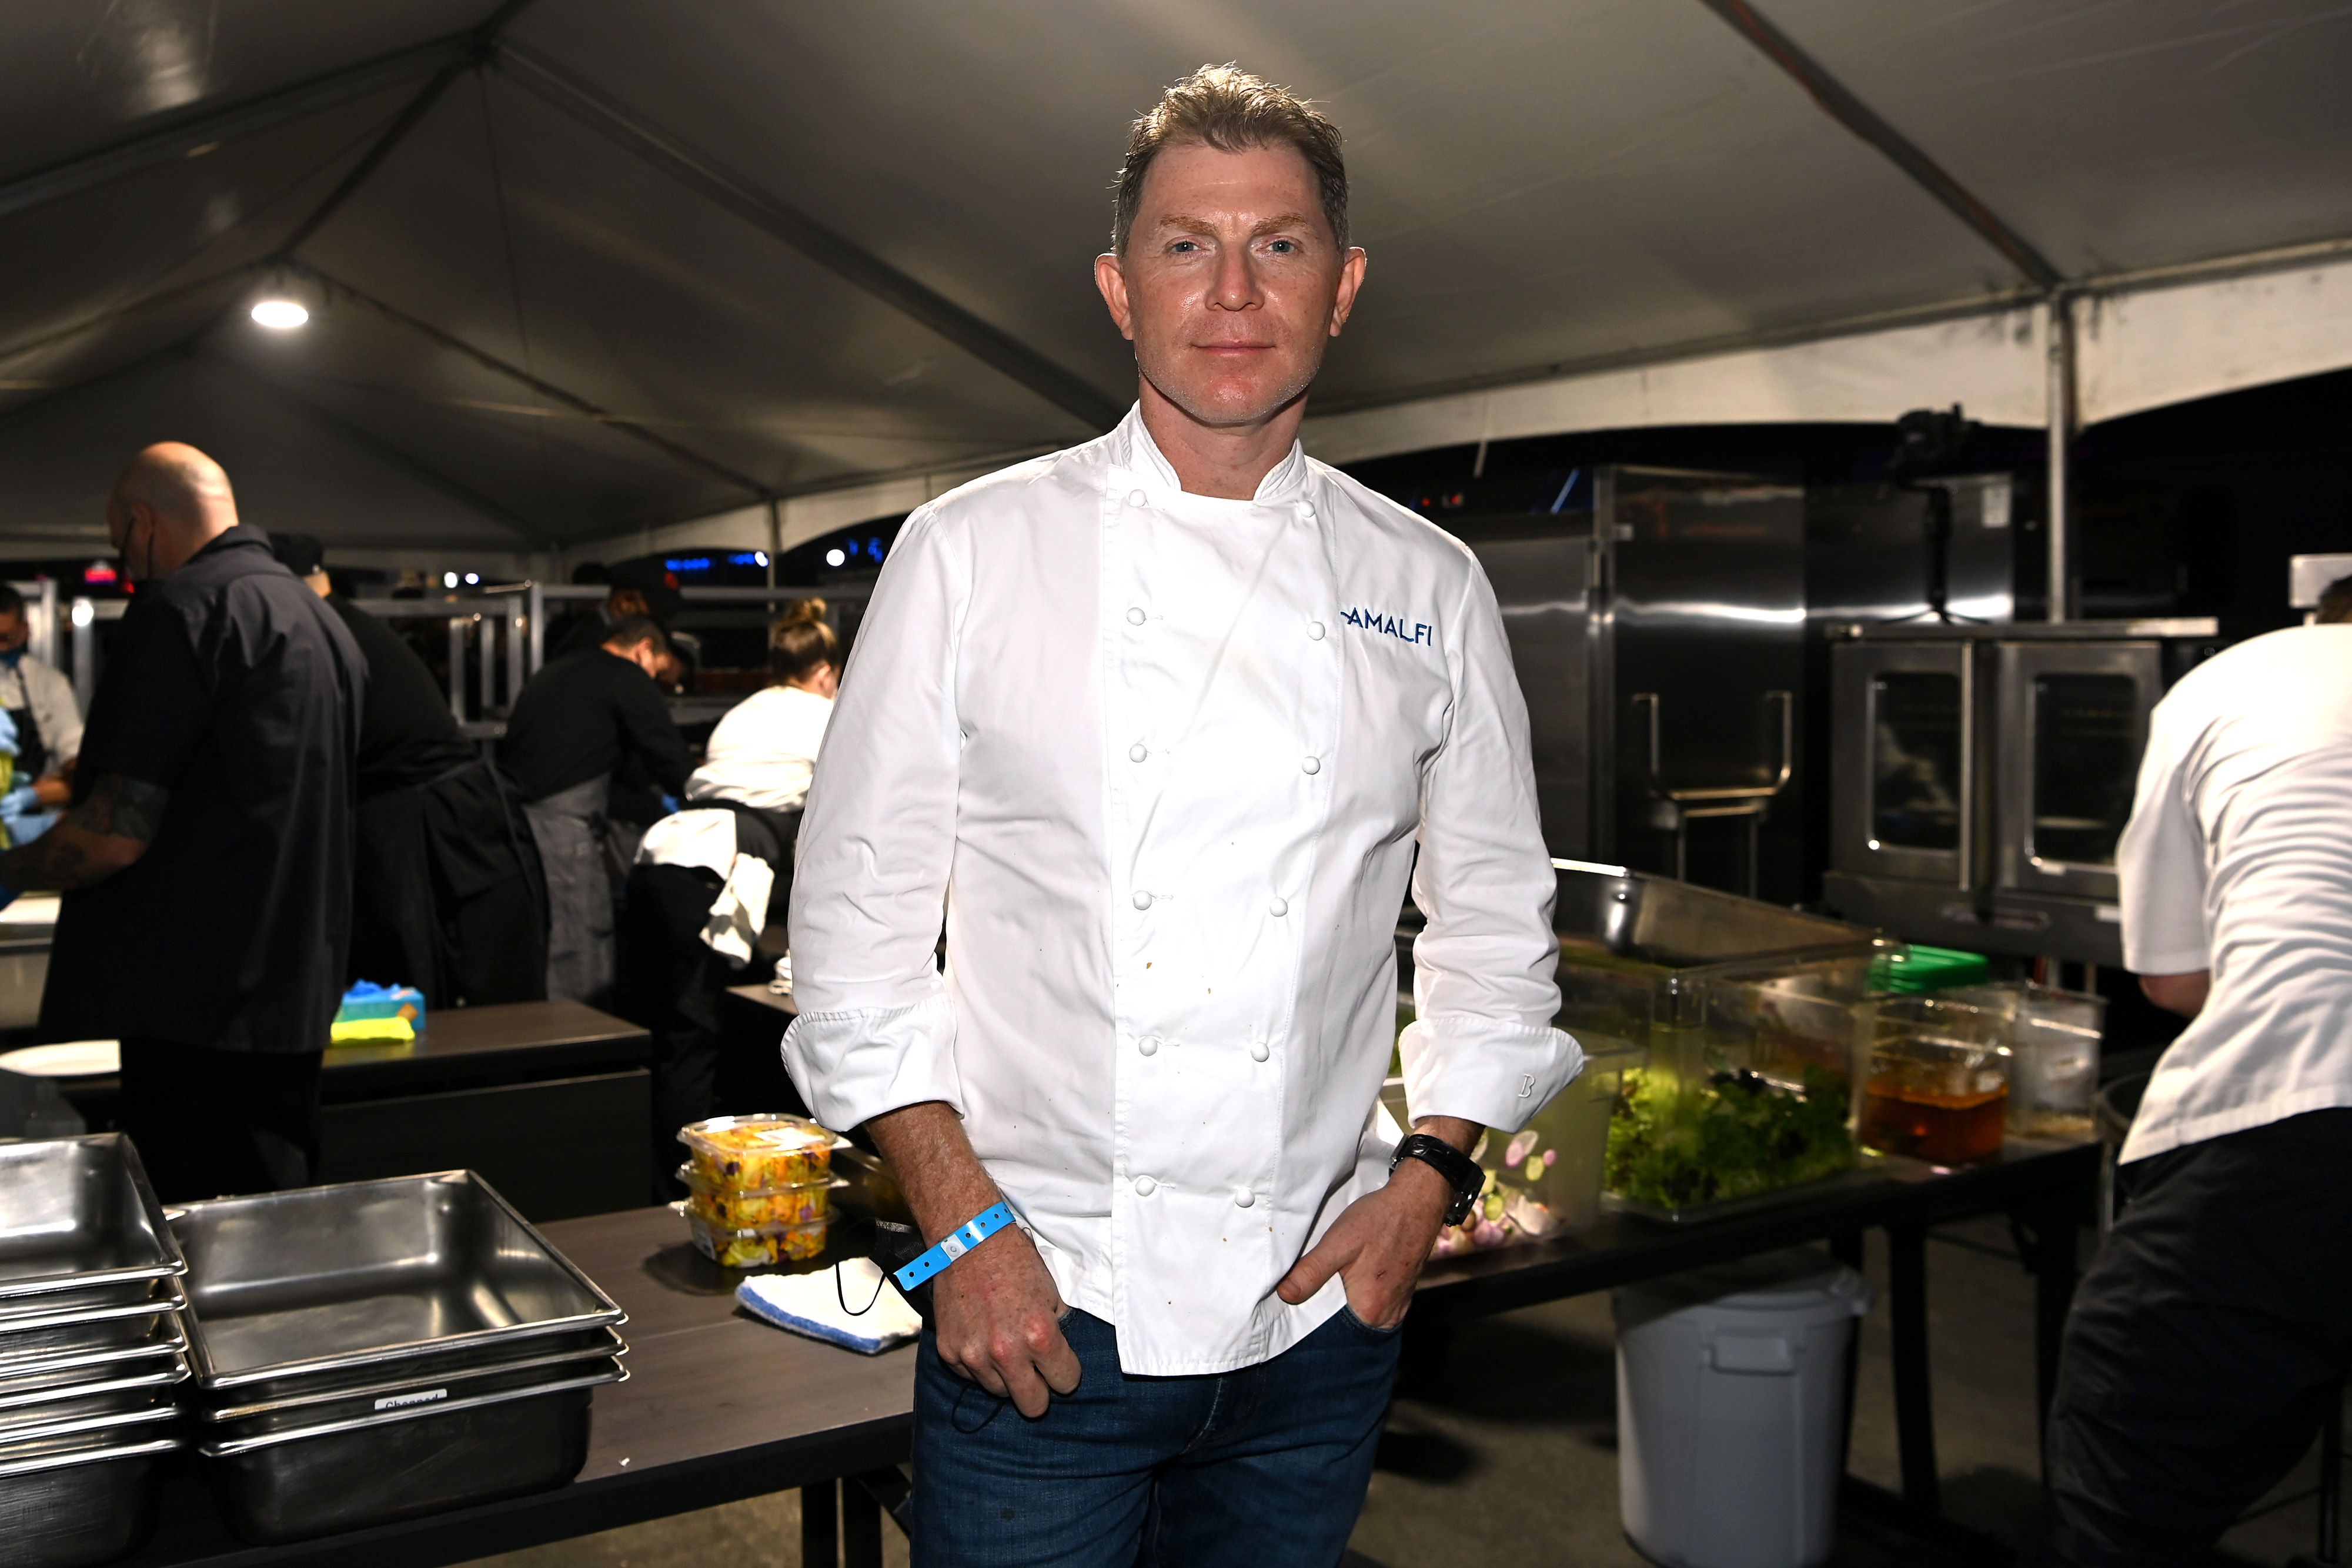 Food Network star Bobby Flay, who can boast a highly rated pizza dough recipe, stands in a kitchen in his chef whites.